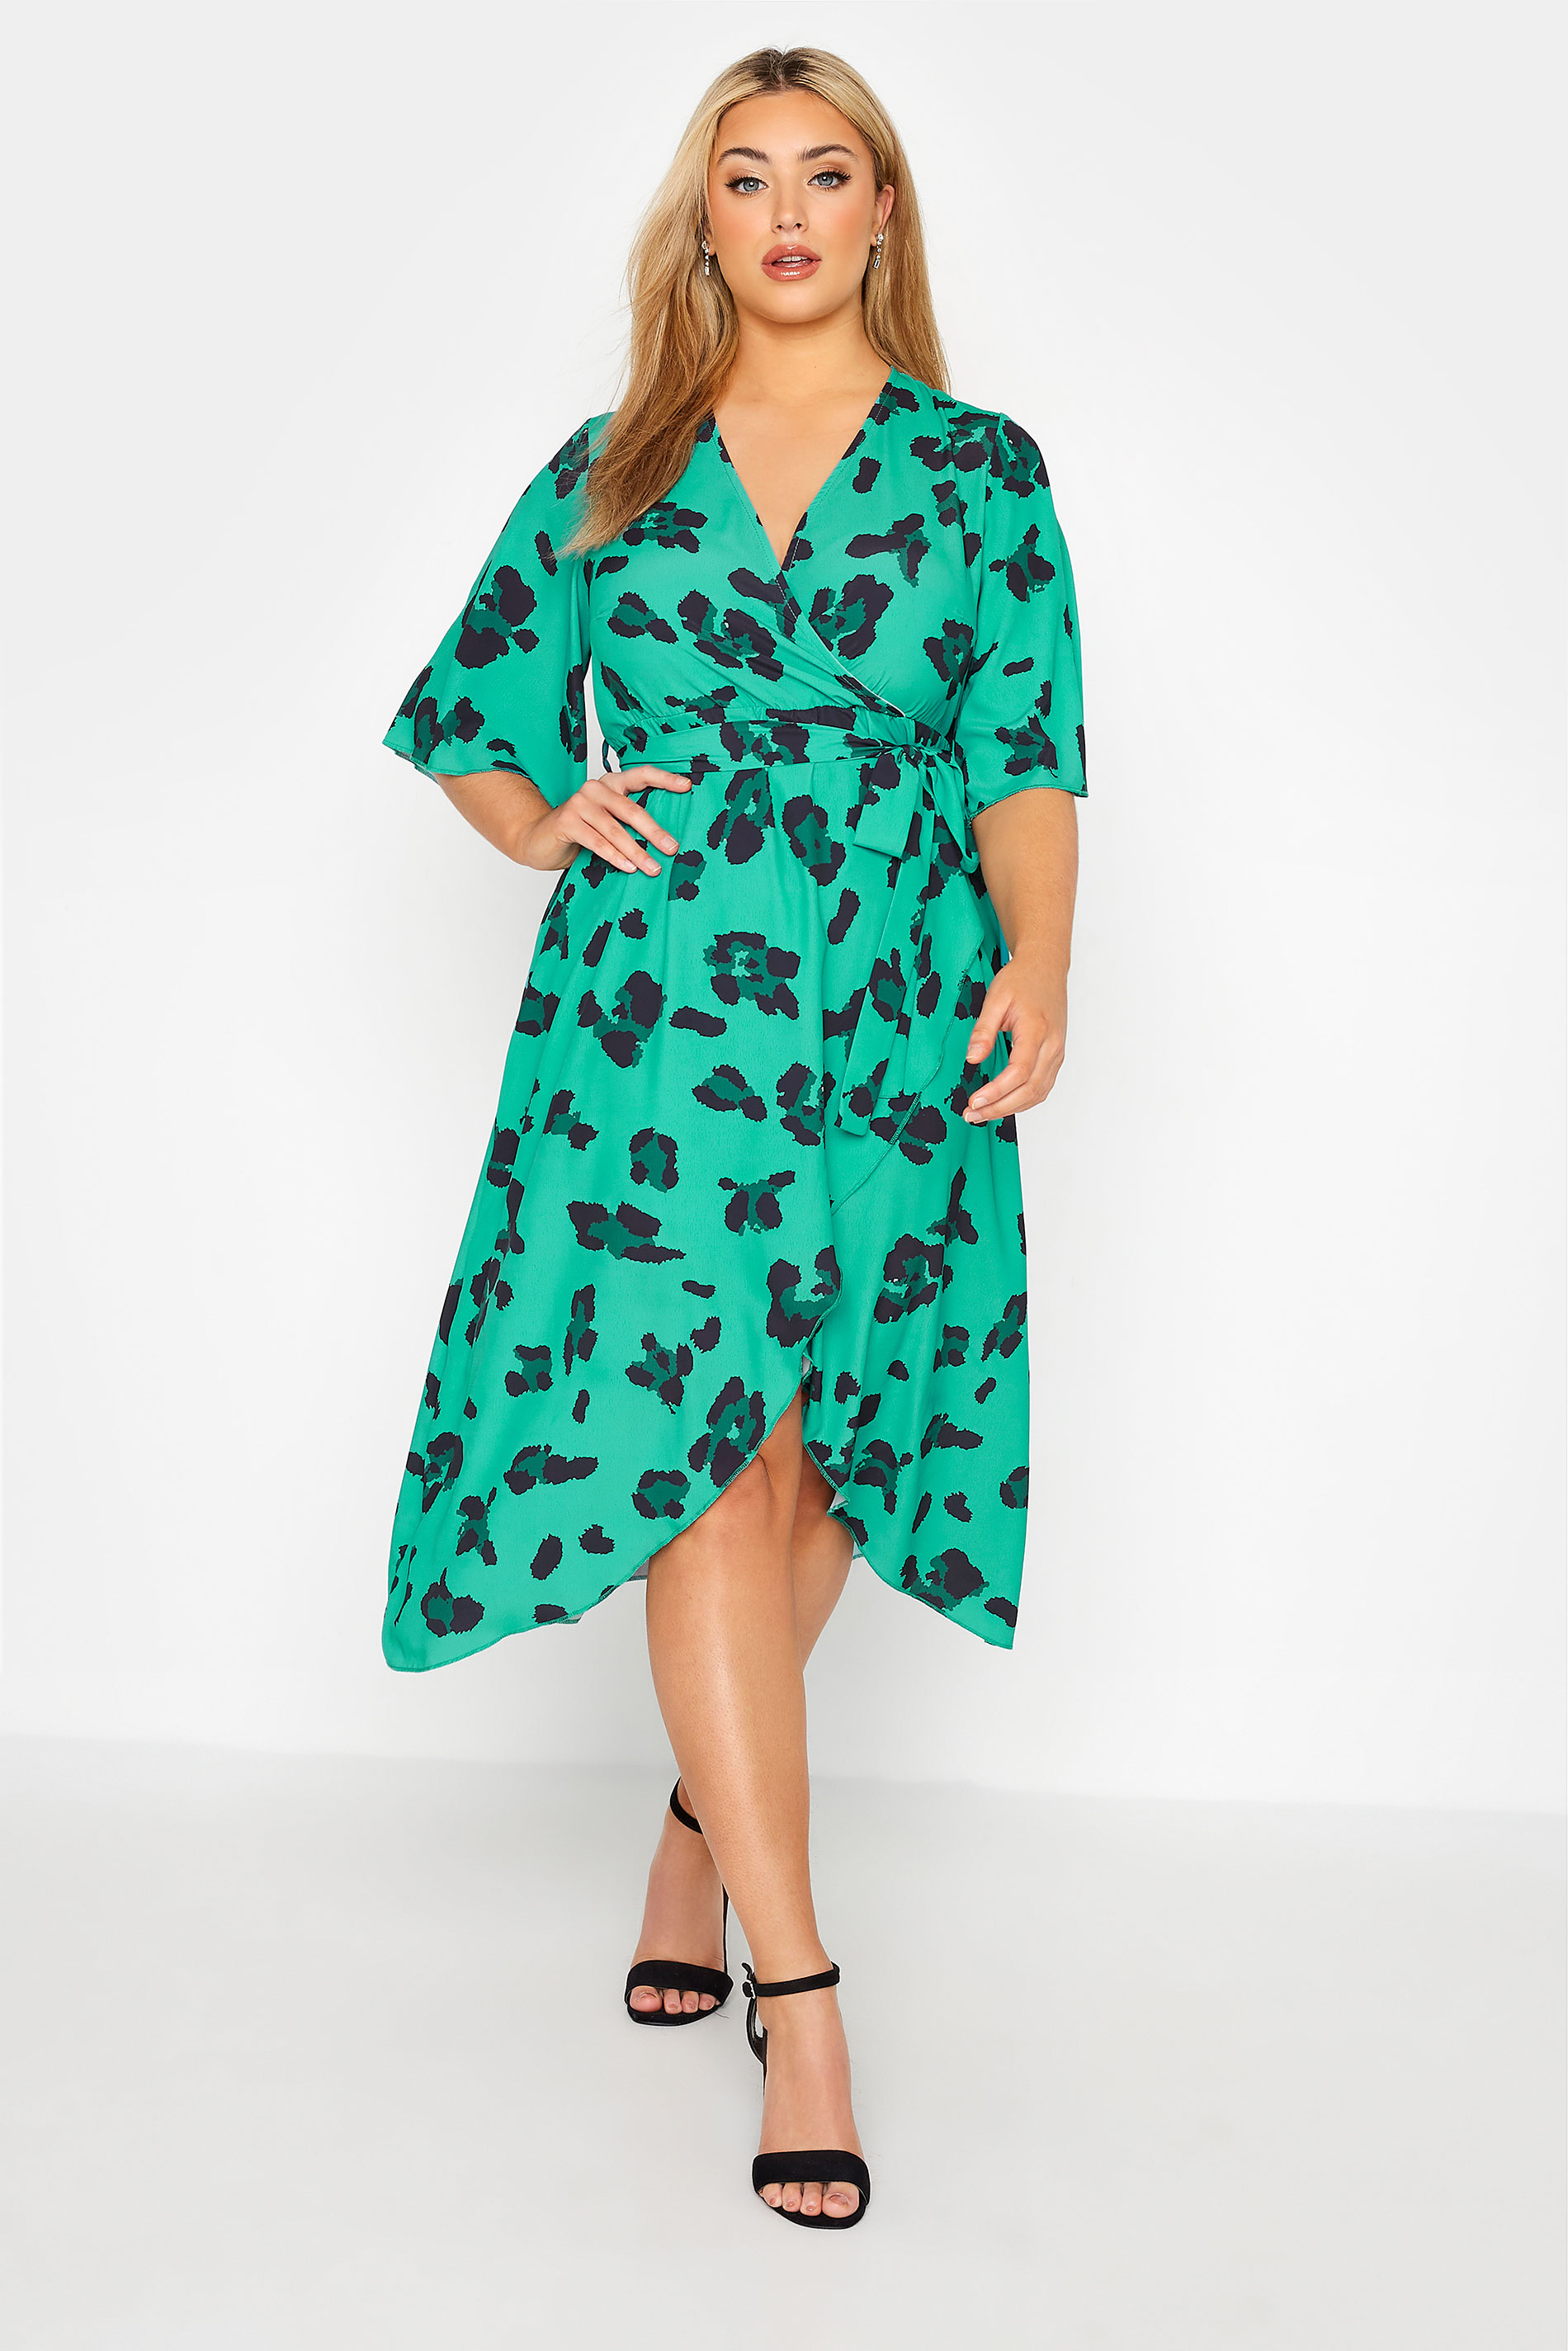 Robes Grande Taille Grande taille  Robes Portefeuilles | YOURS LONDON - Robe Verte Léopard Style Portefeuille - YF82141